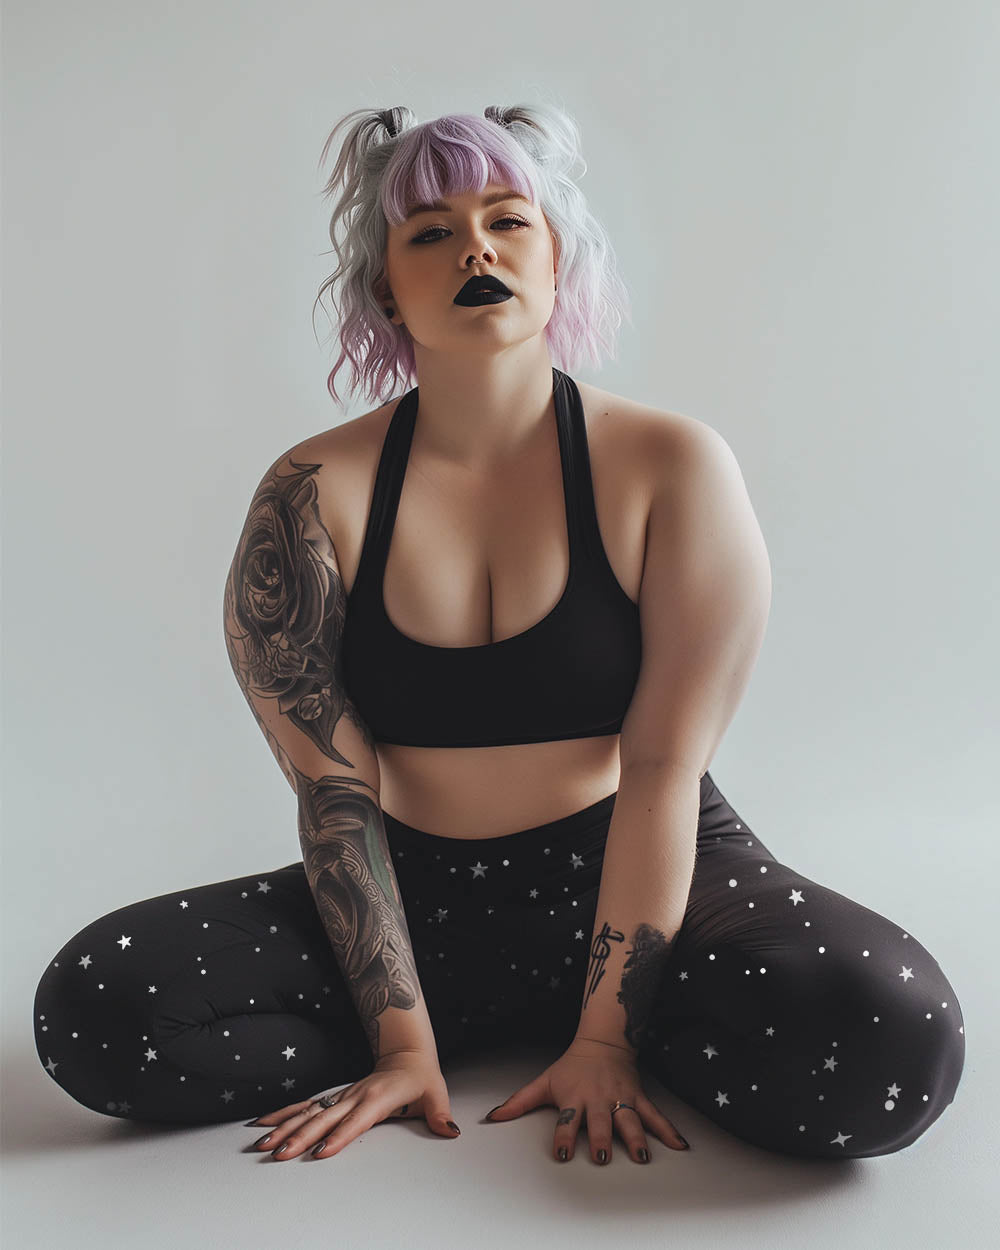 Starry Night Plus Size Leggings - UPF 50+ Protection Witchy Occult Pagan Style Activewear - Goth Yoga Vegan Leisurewear